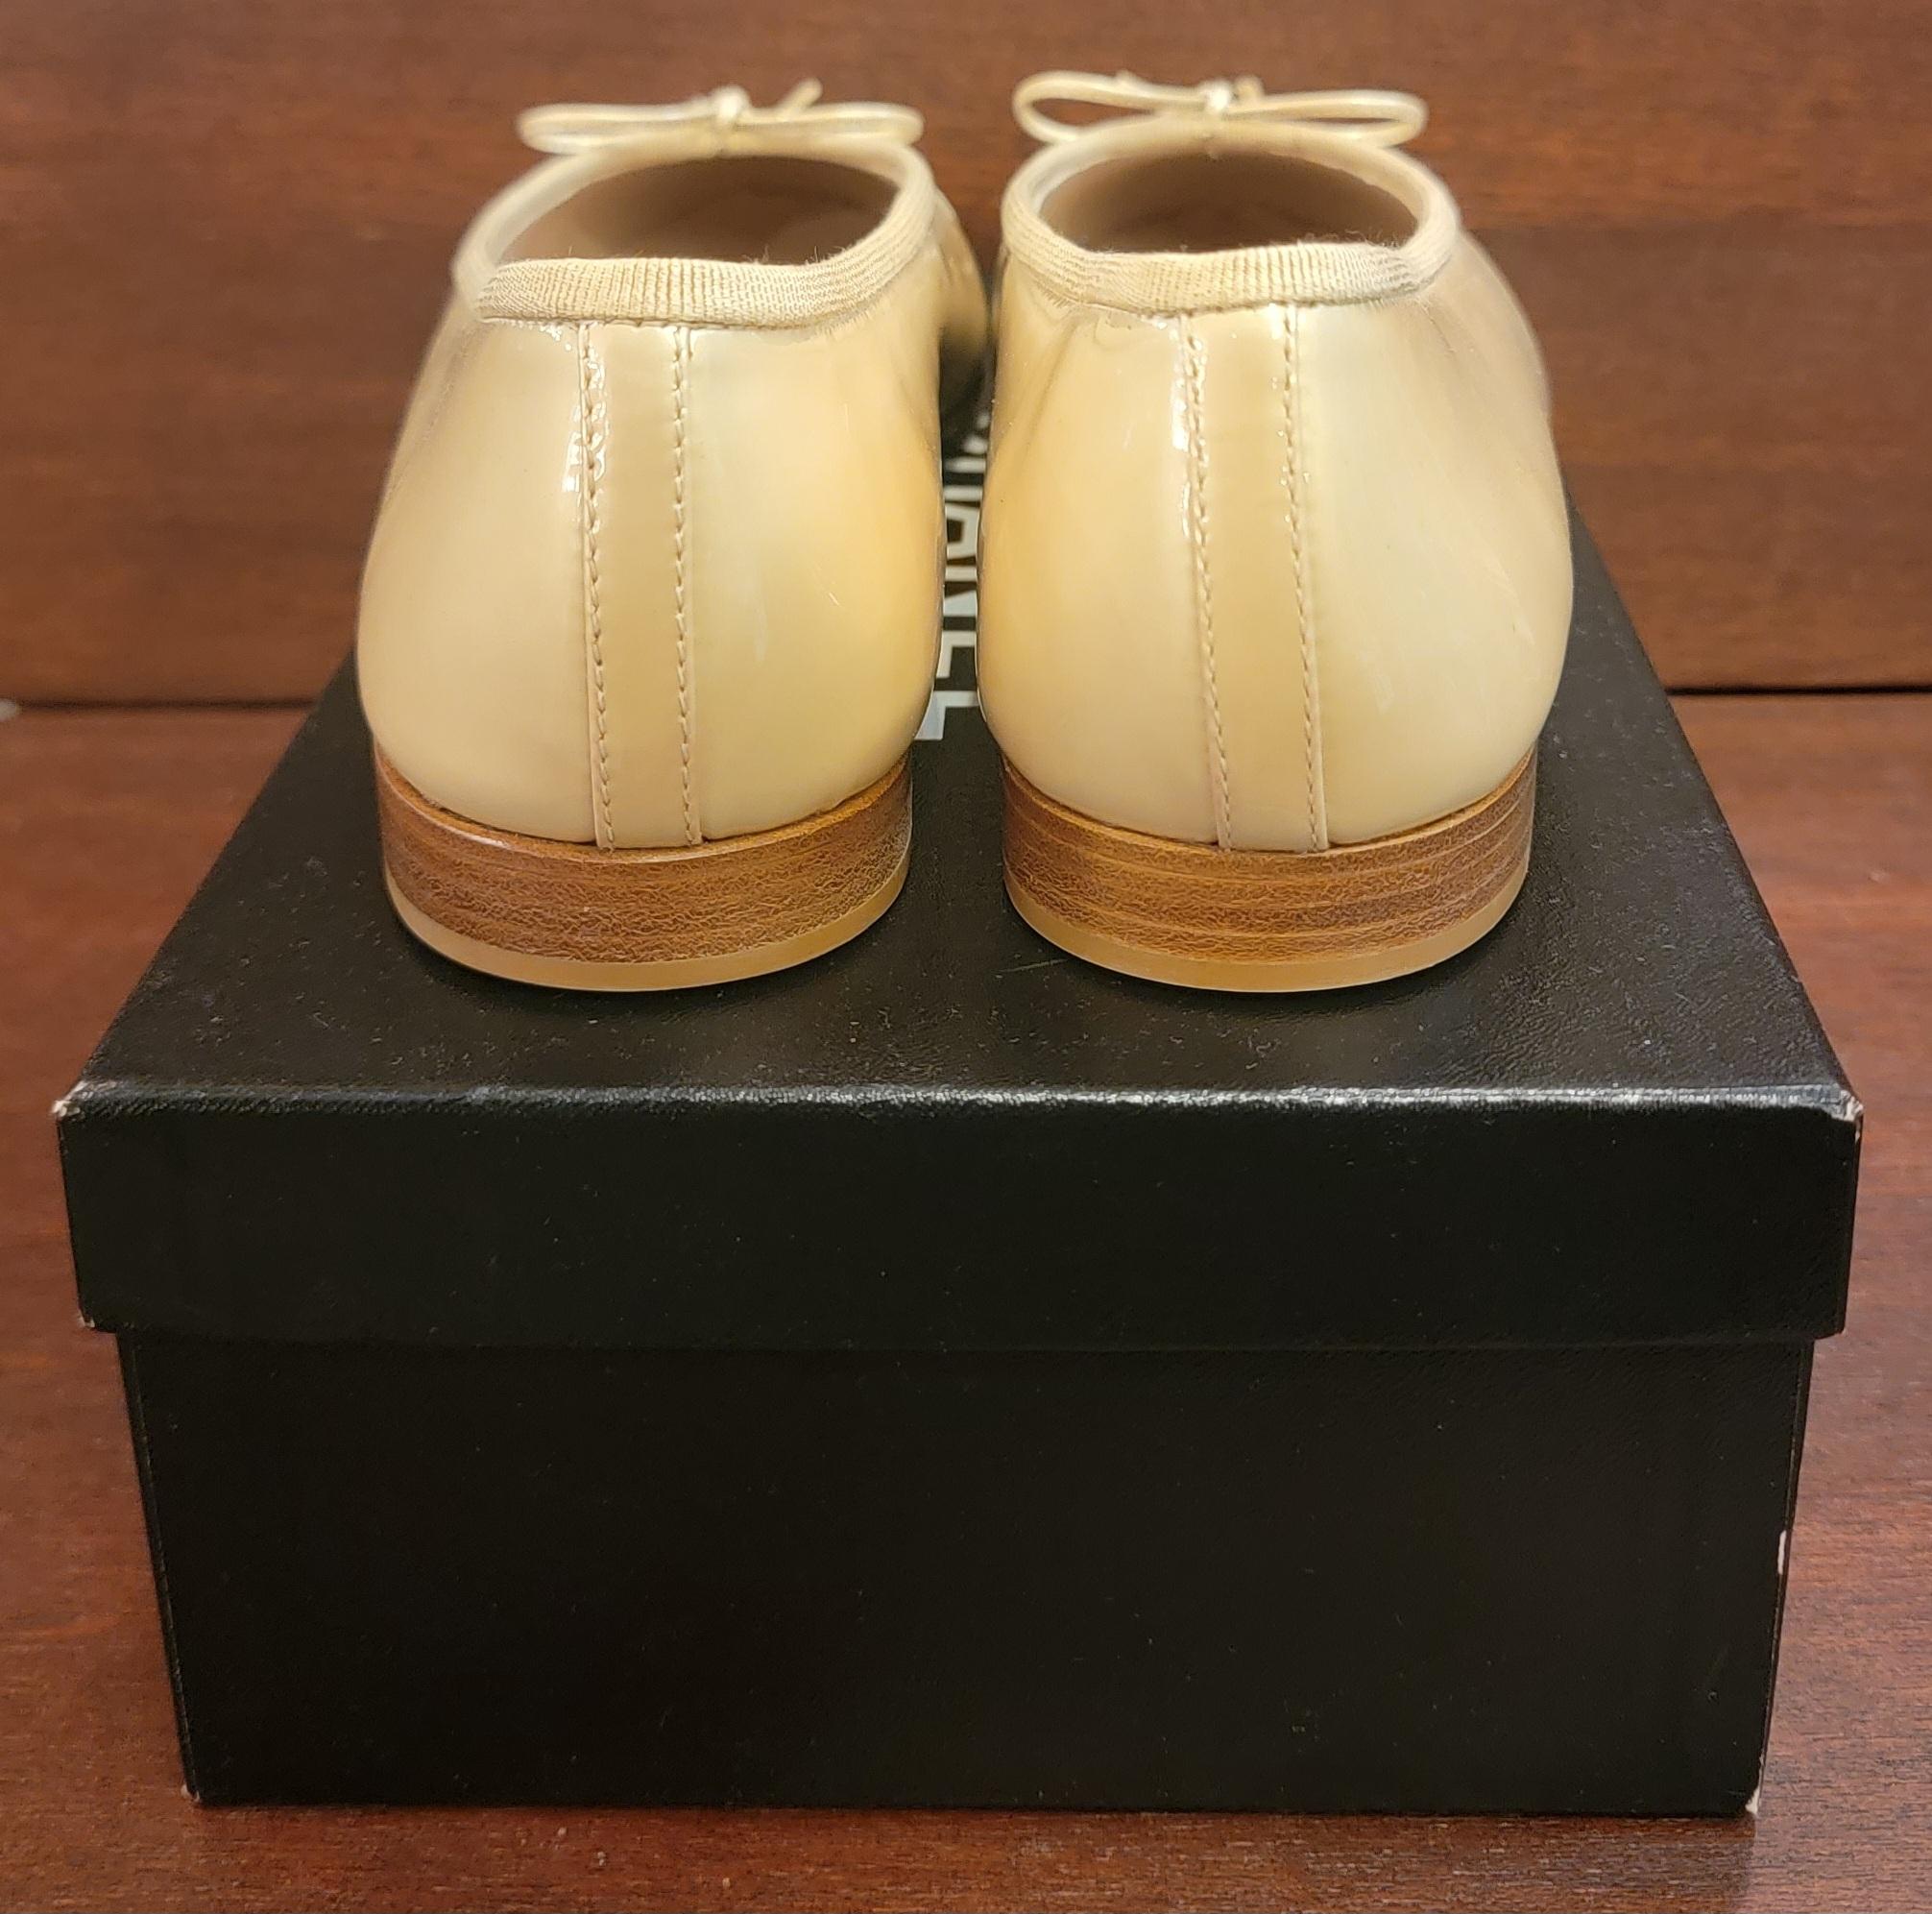 Rare Brande New Chanel Ballerina  Tan Leather Shoes. Wondderful Bow tie accents in the front with the Double CC underneath. The sole is a beautiful tan sole that accentuates the entire frame of the shoes.
Size 39